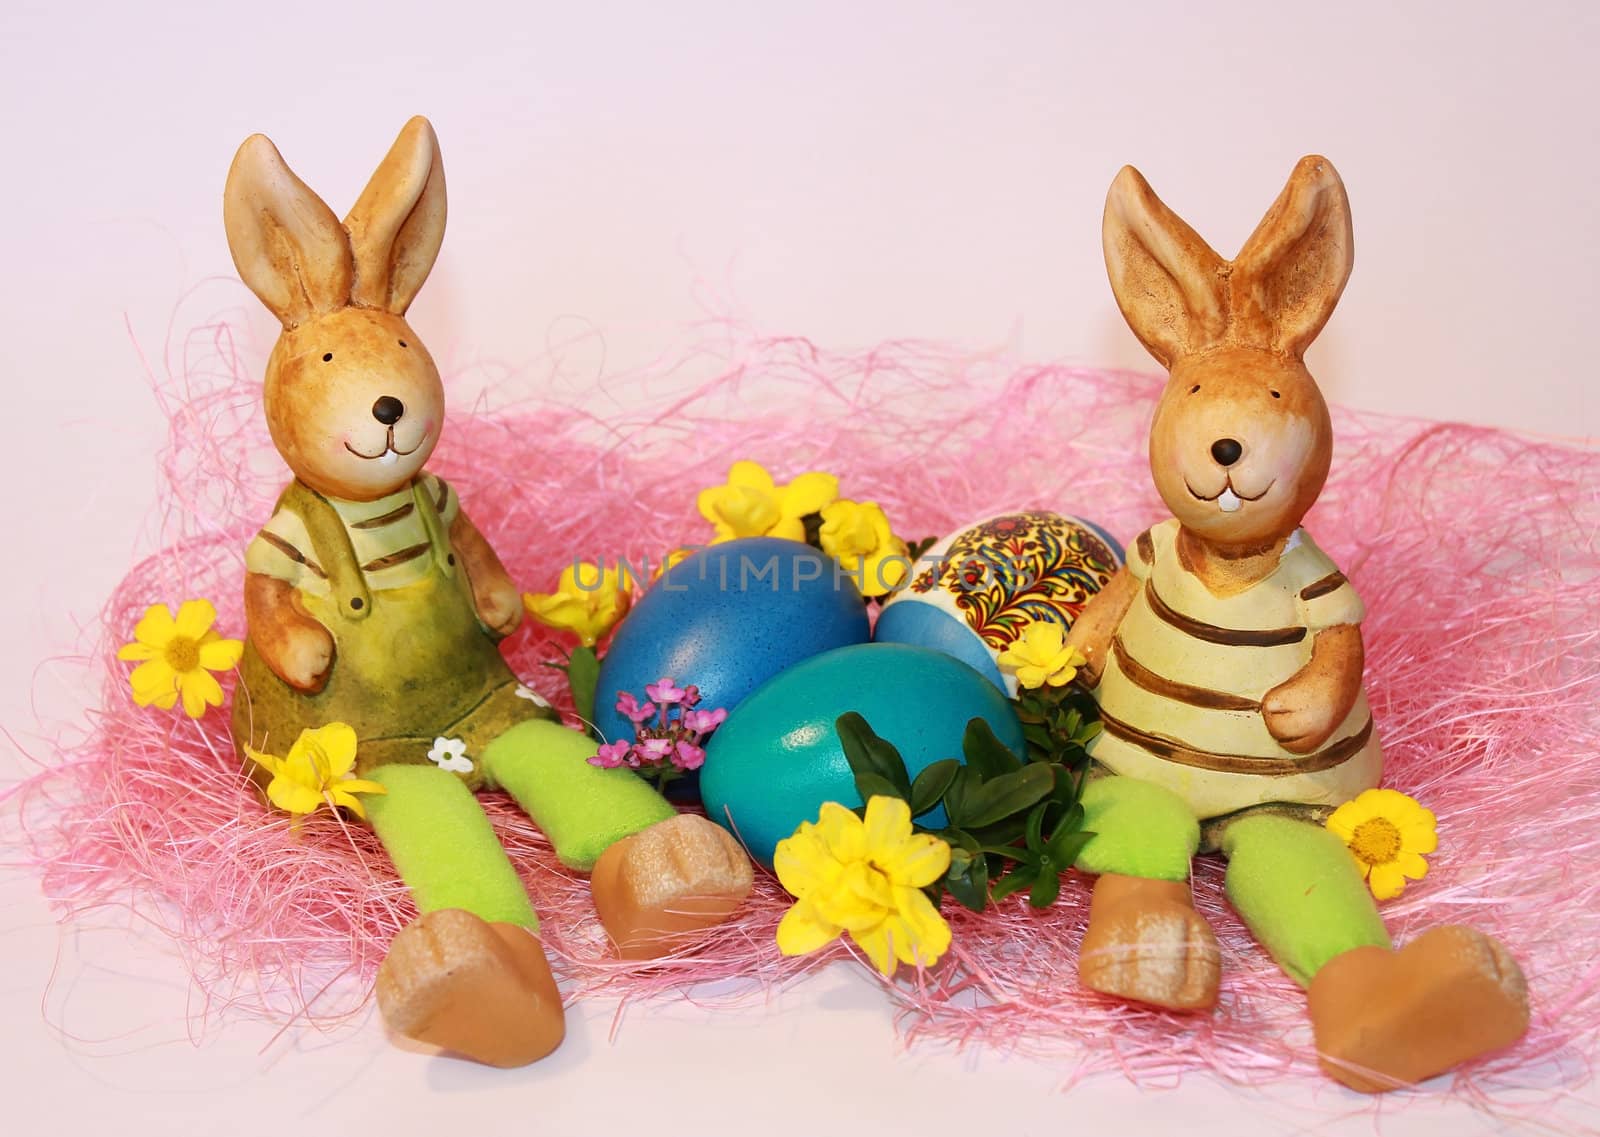 toy rabbits are sitting near the dyed Easter eggs on a pink background